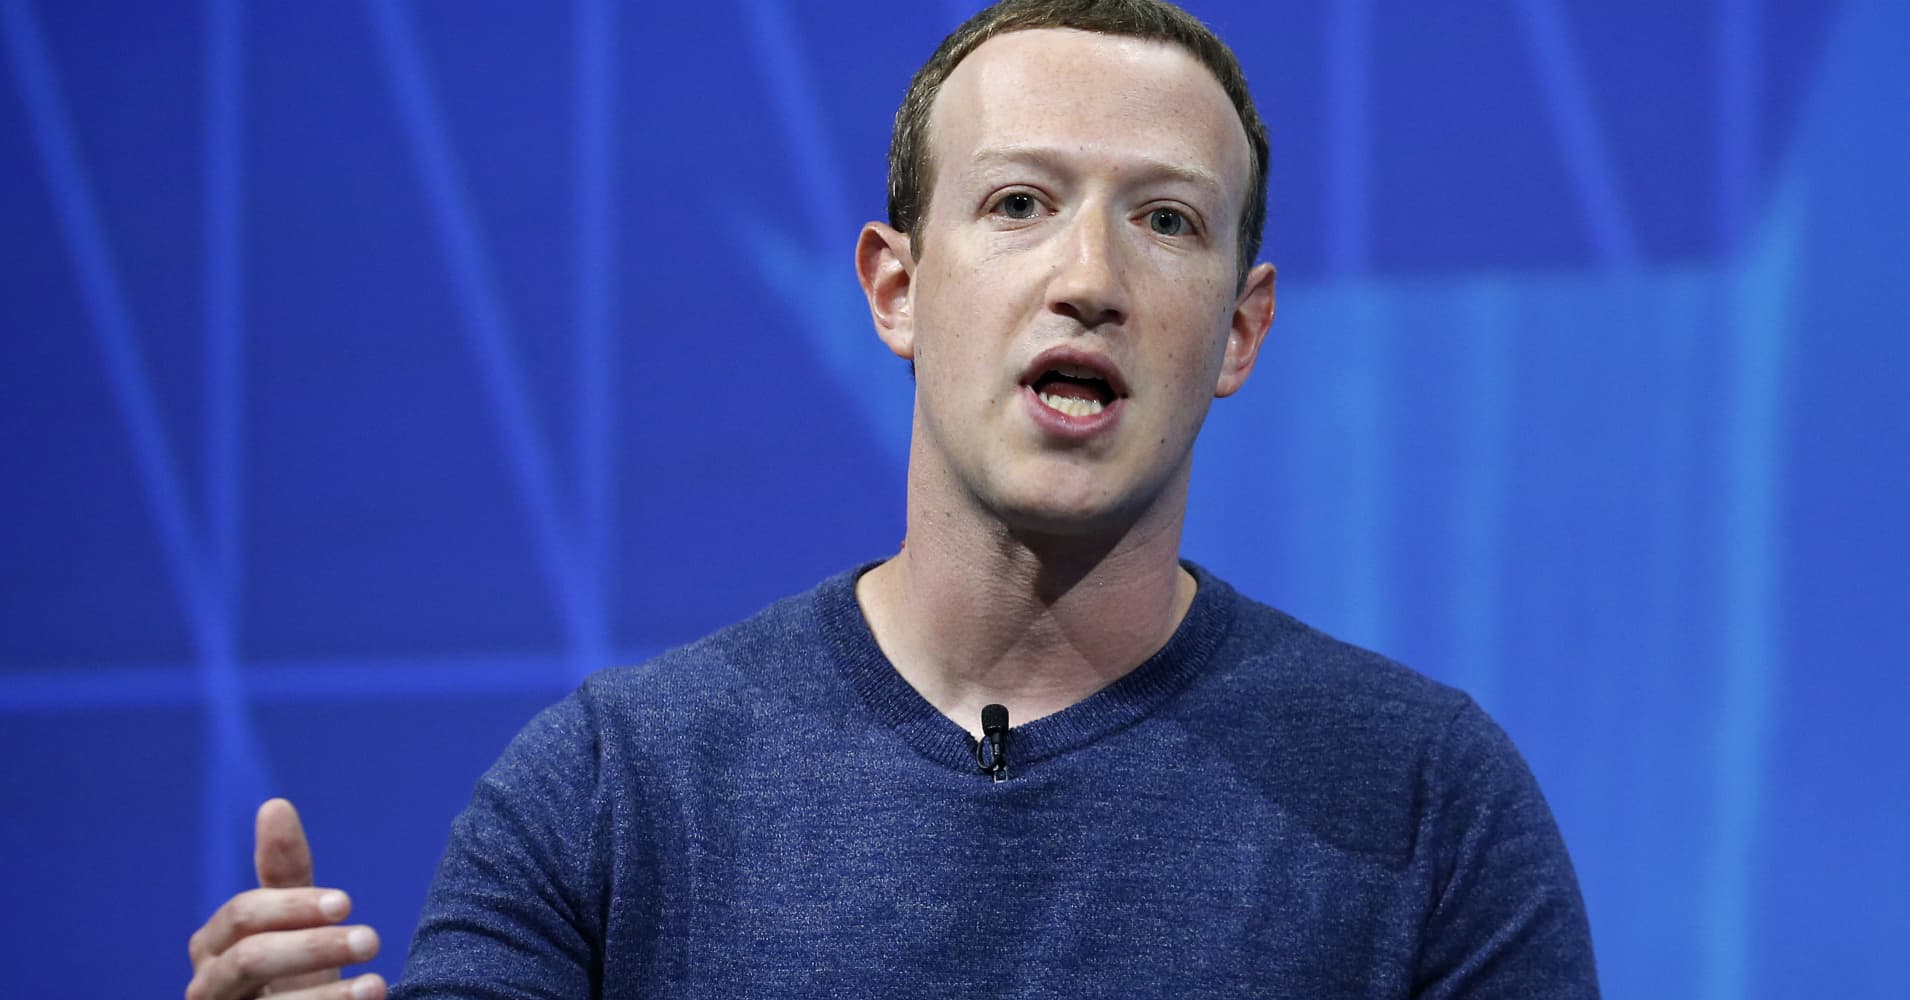 Facebook's Mark Zuckerberg goes on the defensive: 'We don't sell people's data'